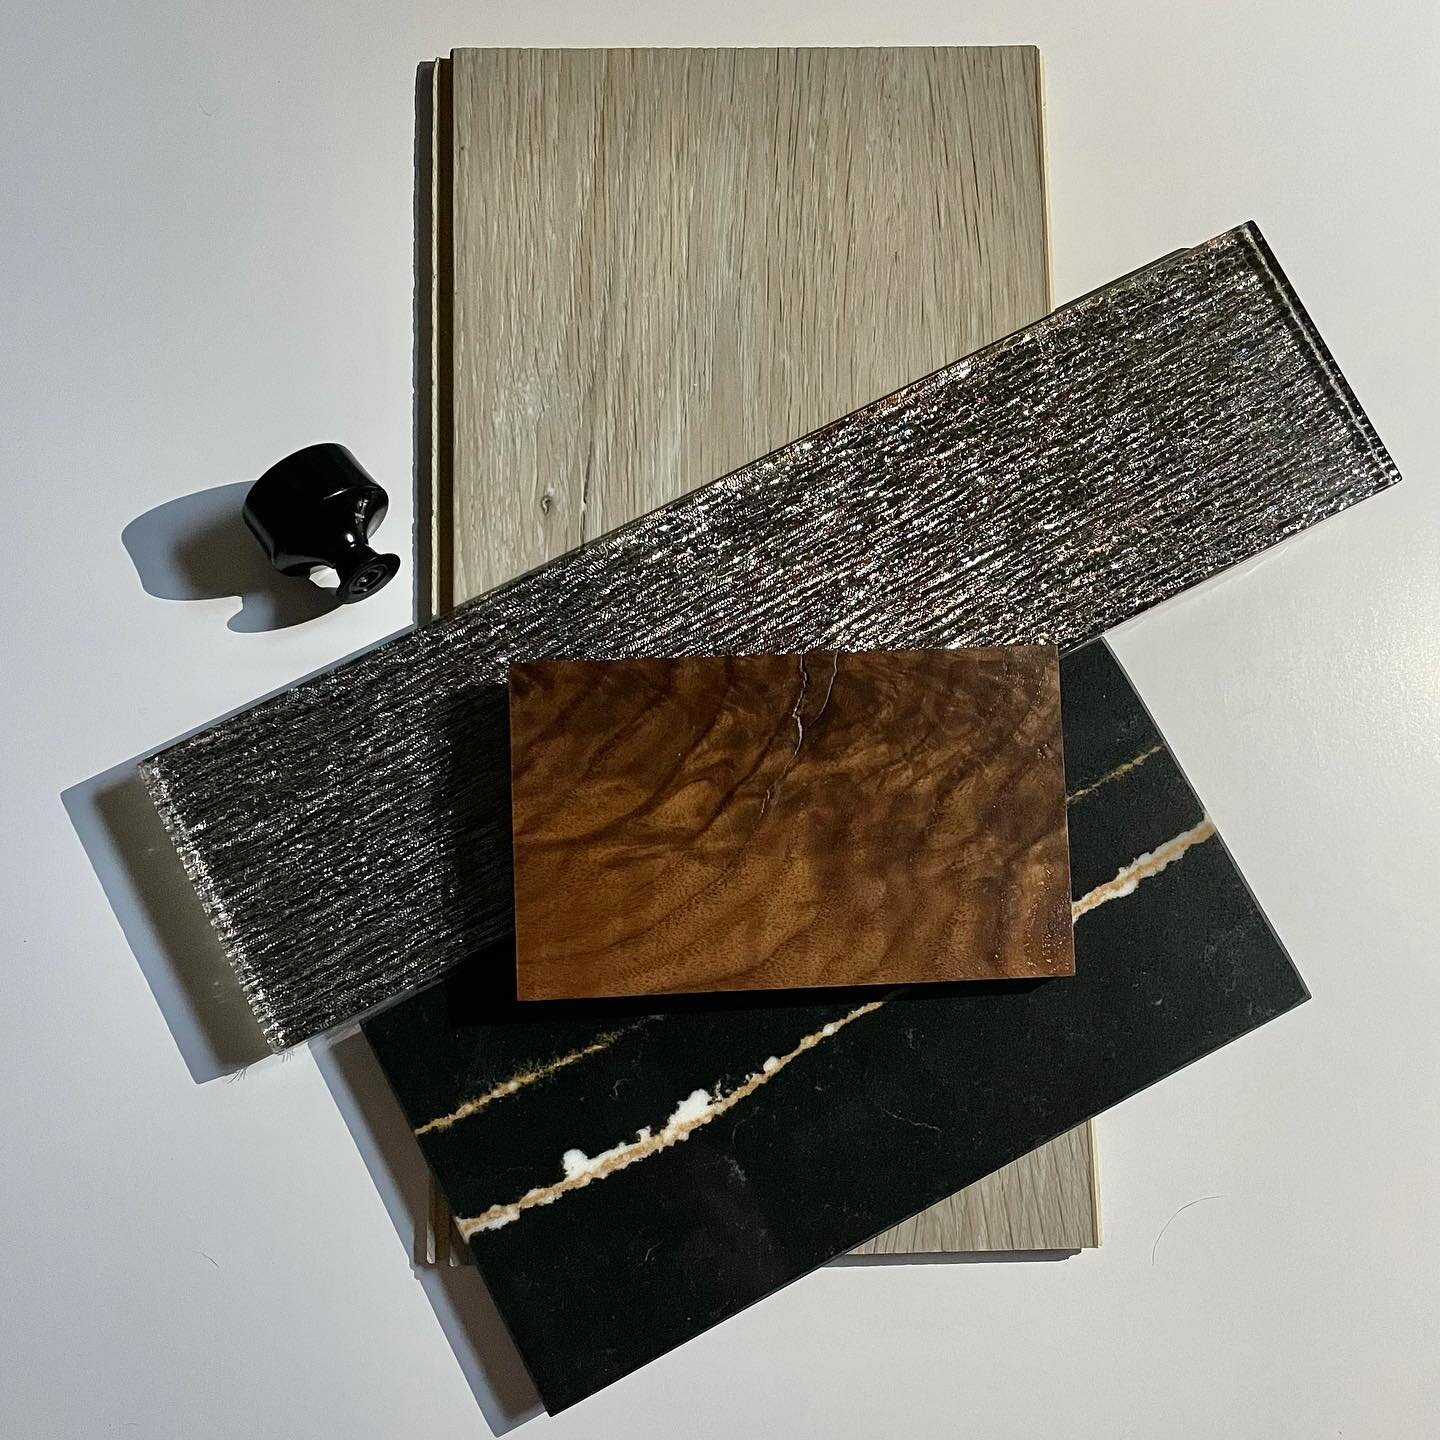 Happy #moodboardmonday! They say that backsplash is the jewelry of a kitchen. This sparkling beauty is sure to catch anyone&rsquo;s eye! Combined with a rich walnut &amp; dramatic quartz creates glamour yet sophistication. Who wants to see this in th